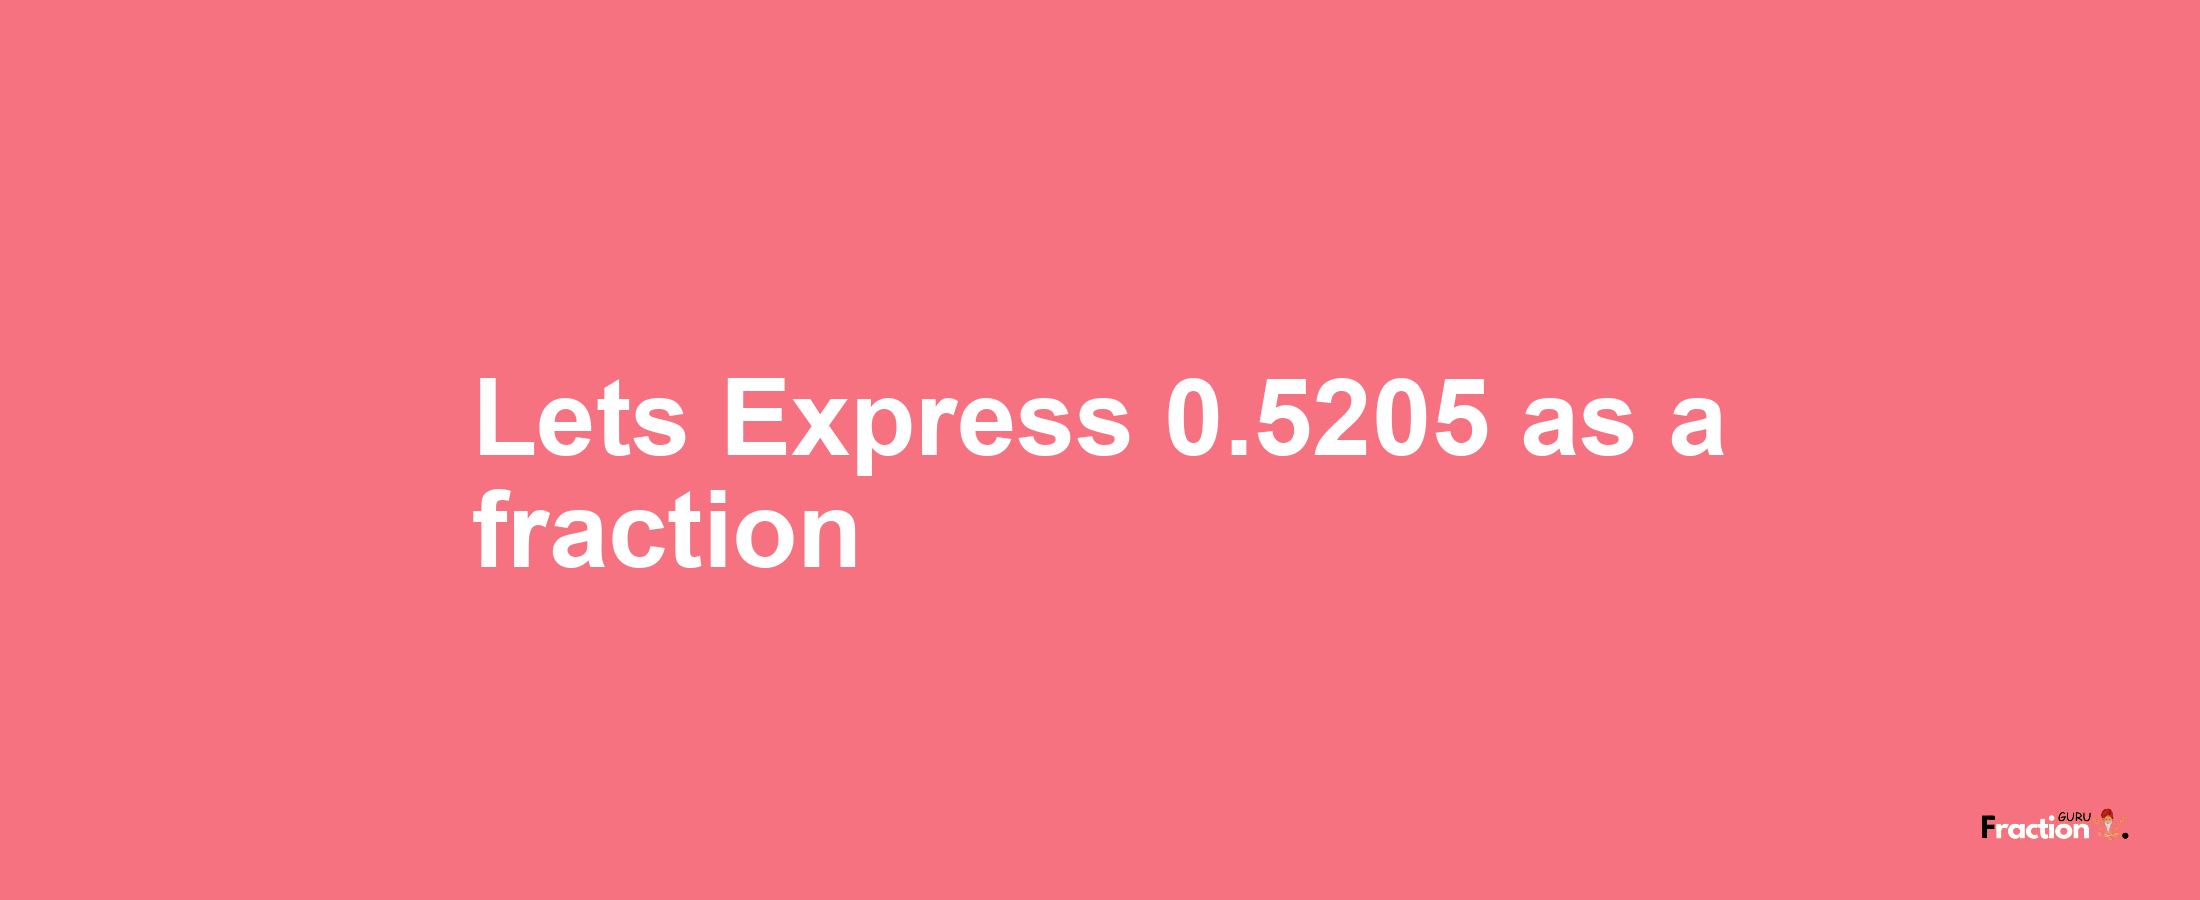 Lets Express 0.5205 as afraction